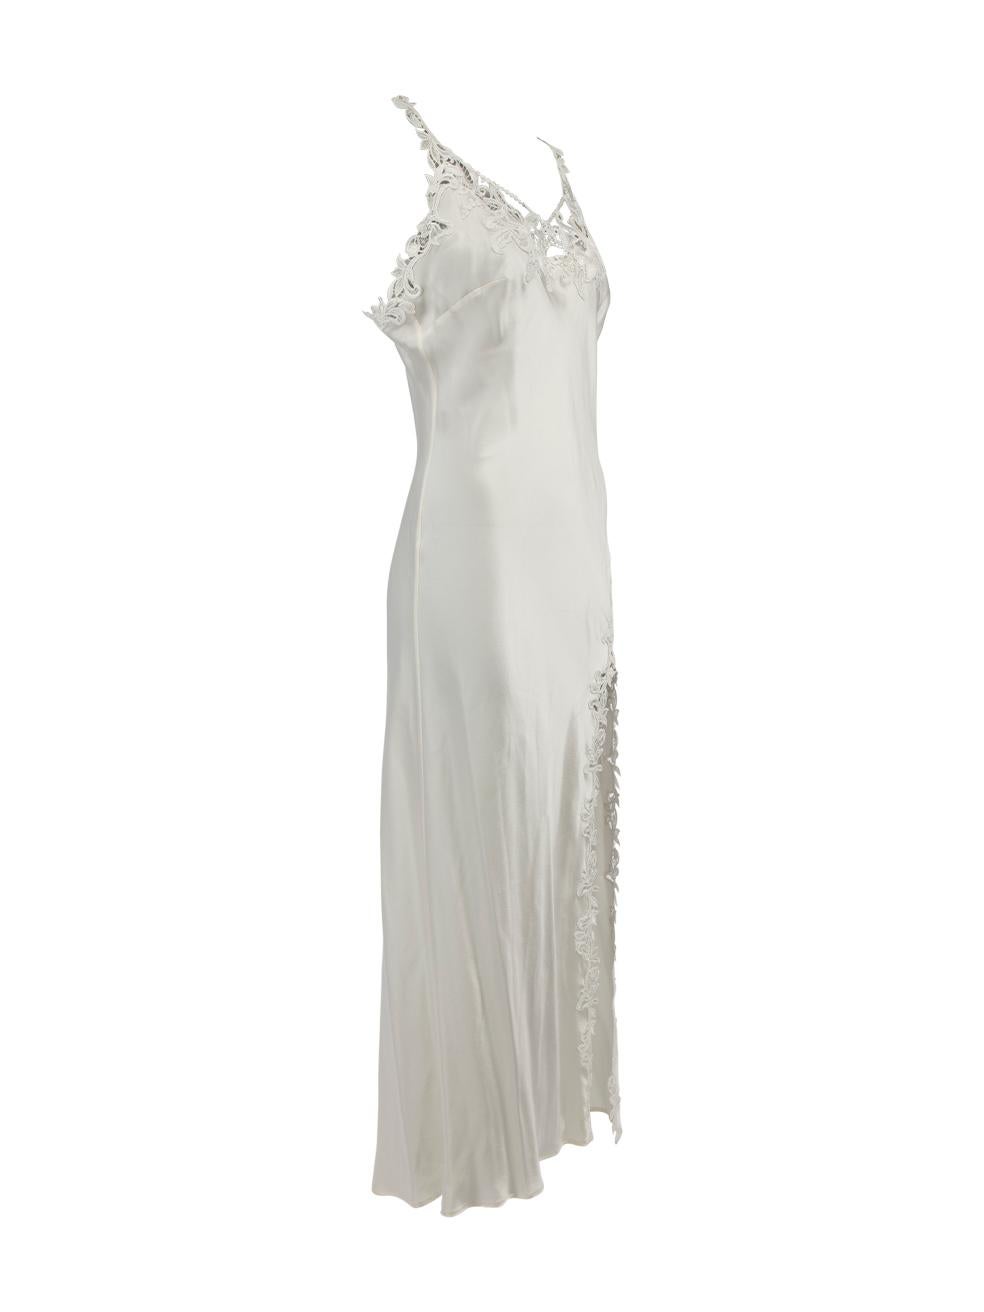 CONDITION is Very good. Minimal wear to dress is evident. Minimal wear to outer silk fabric on this used Marjolaine designer resale item. Details Cream Silk Slip dress Floral lace detailing Maxi length Floral lace adjustable straps Front slit